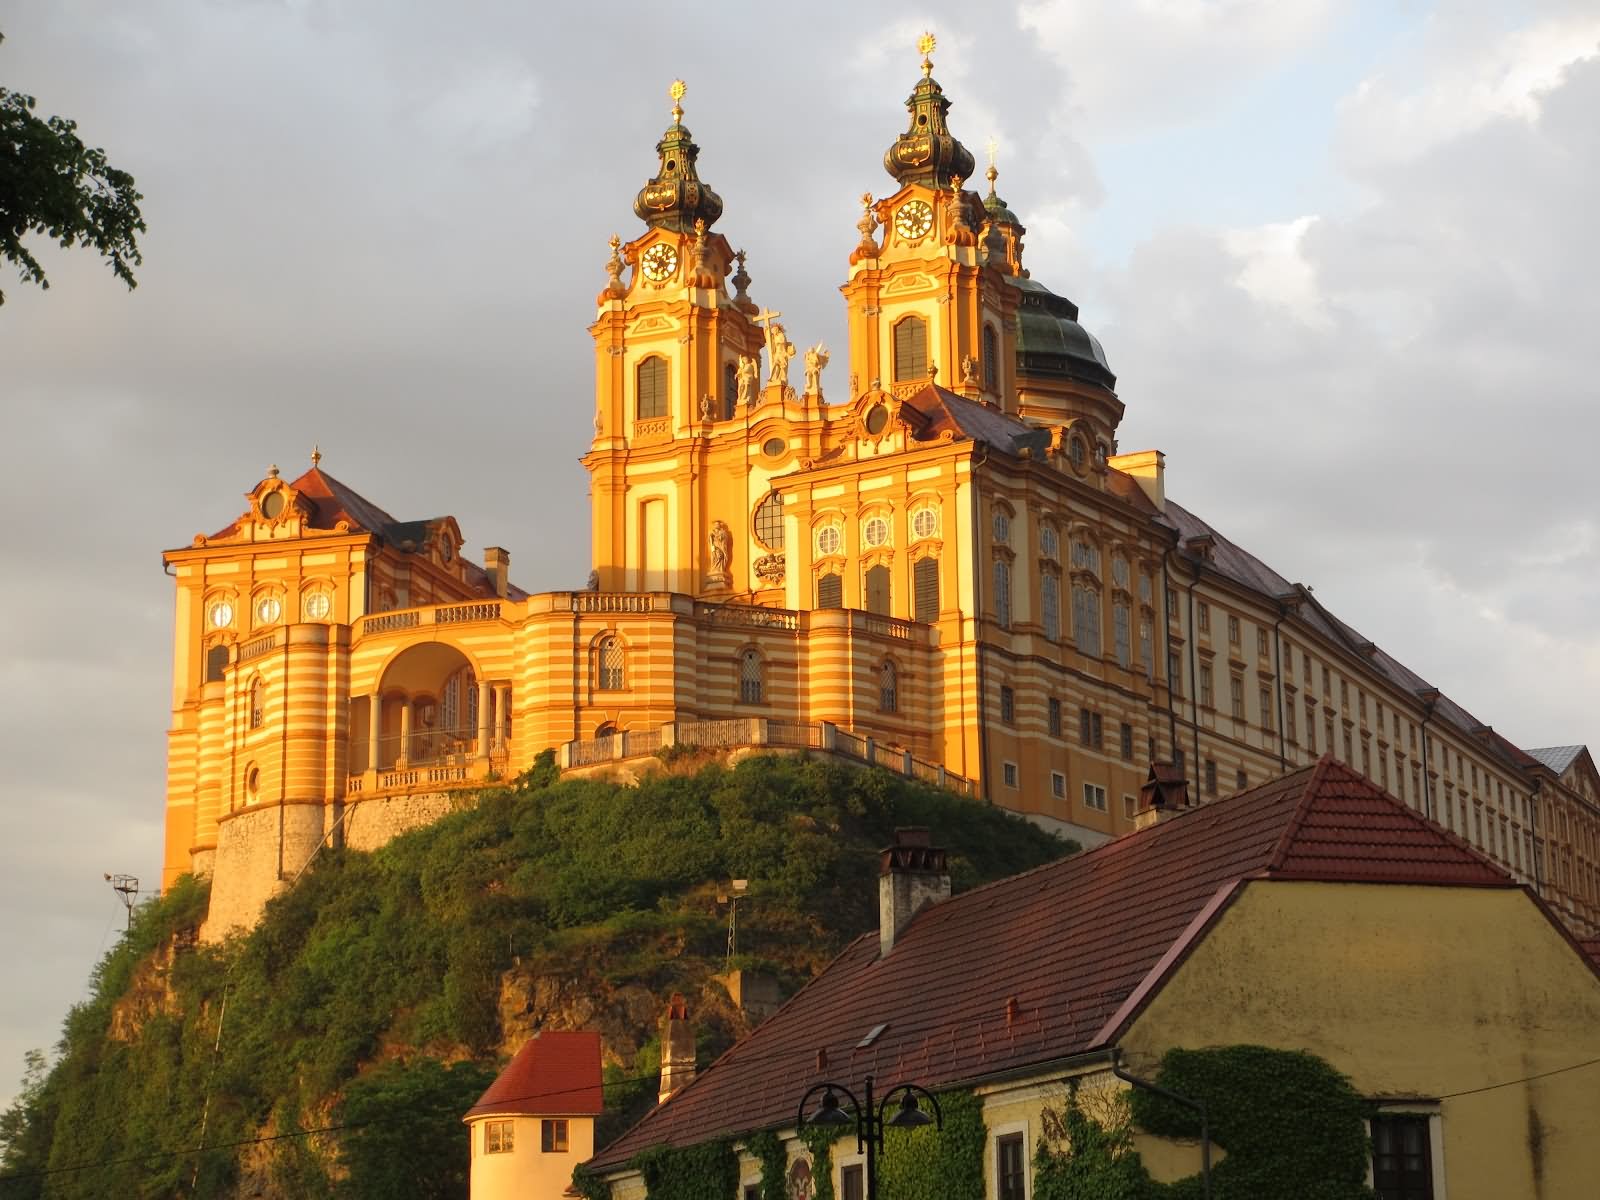 40 Adorable Pictures And Images Of The Melk Abbey In Austria